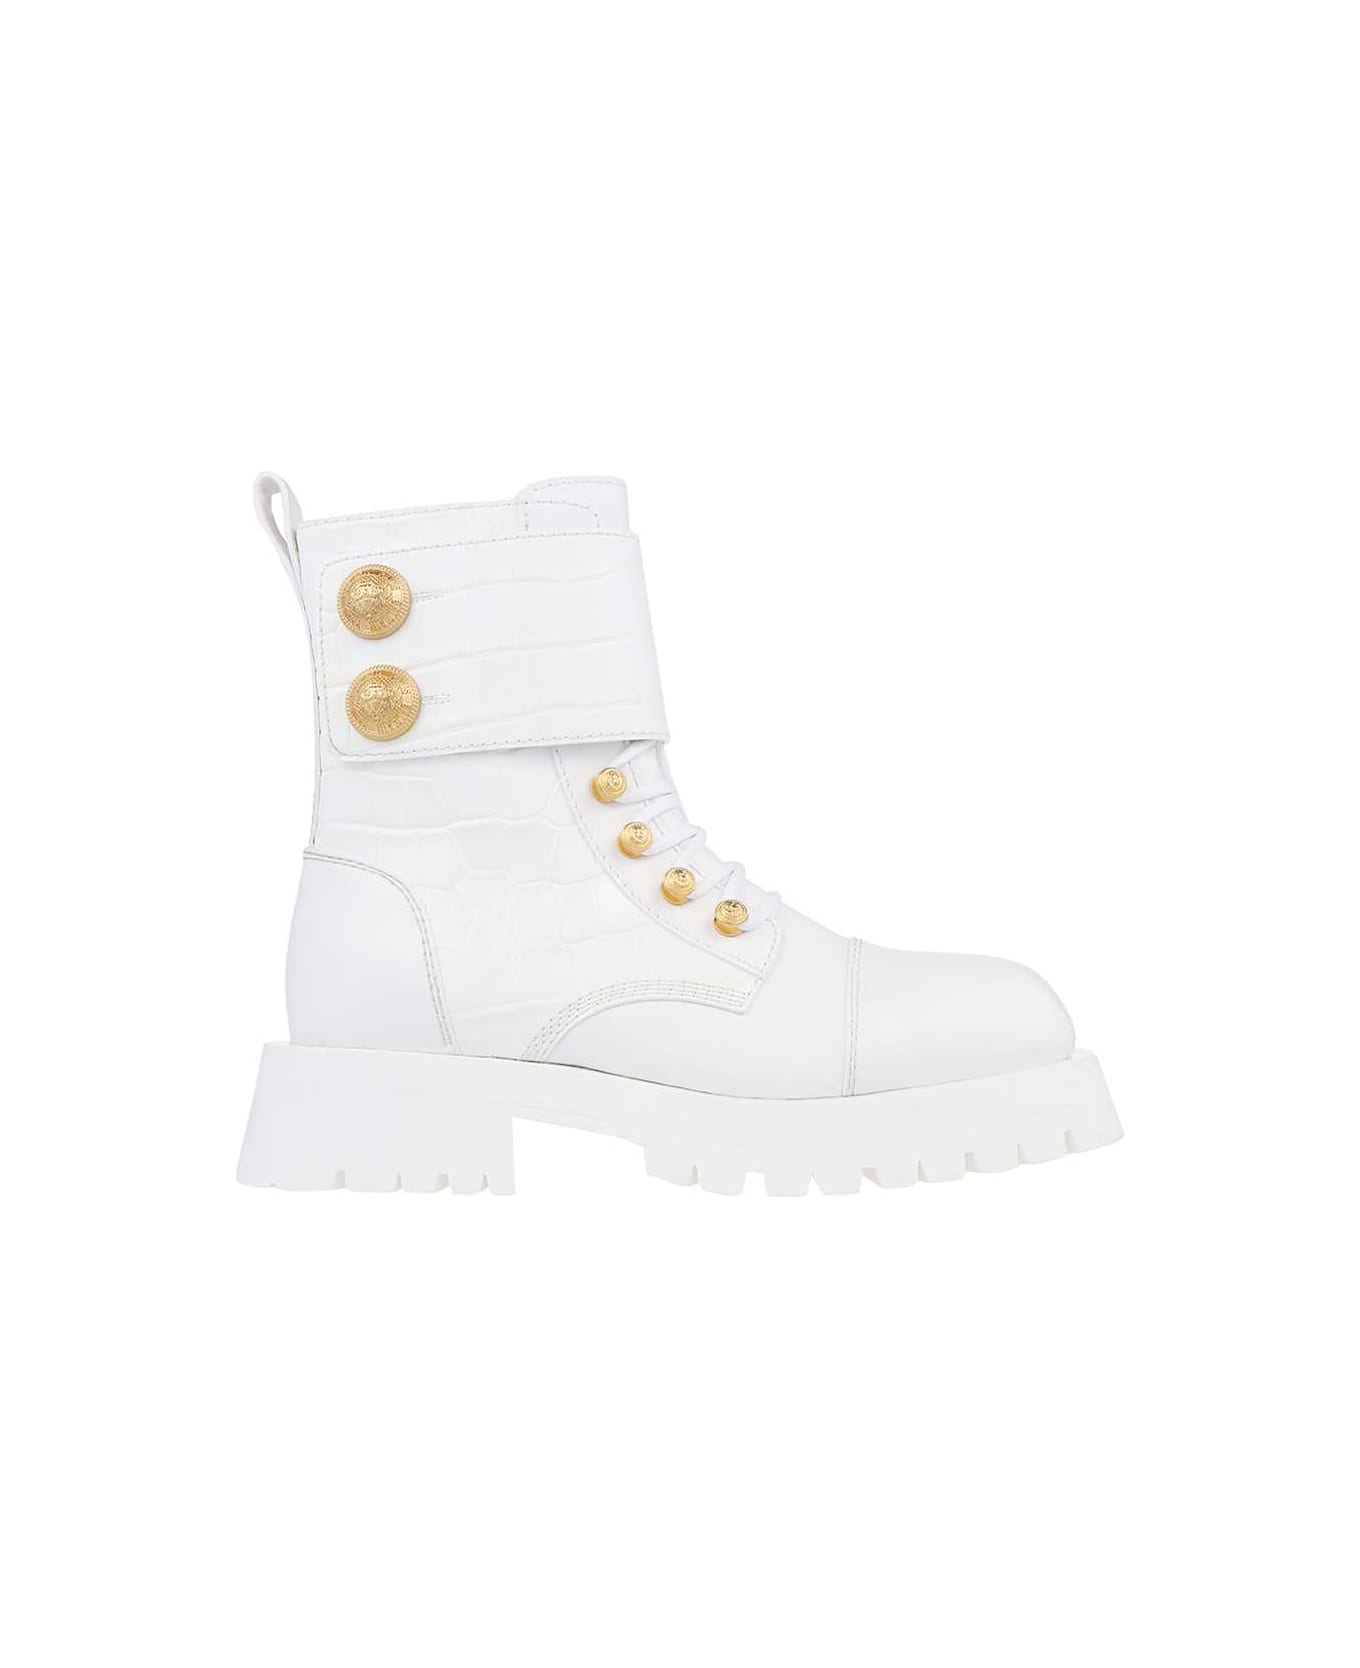 Balmain Leather Lace-up Boots - White